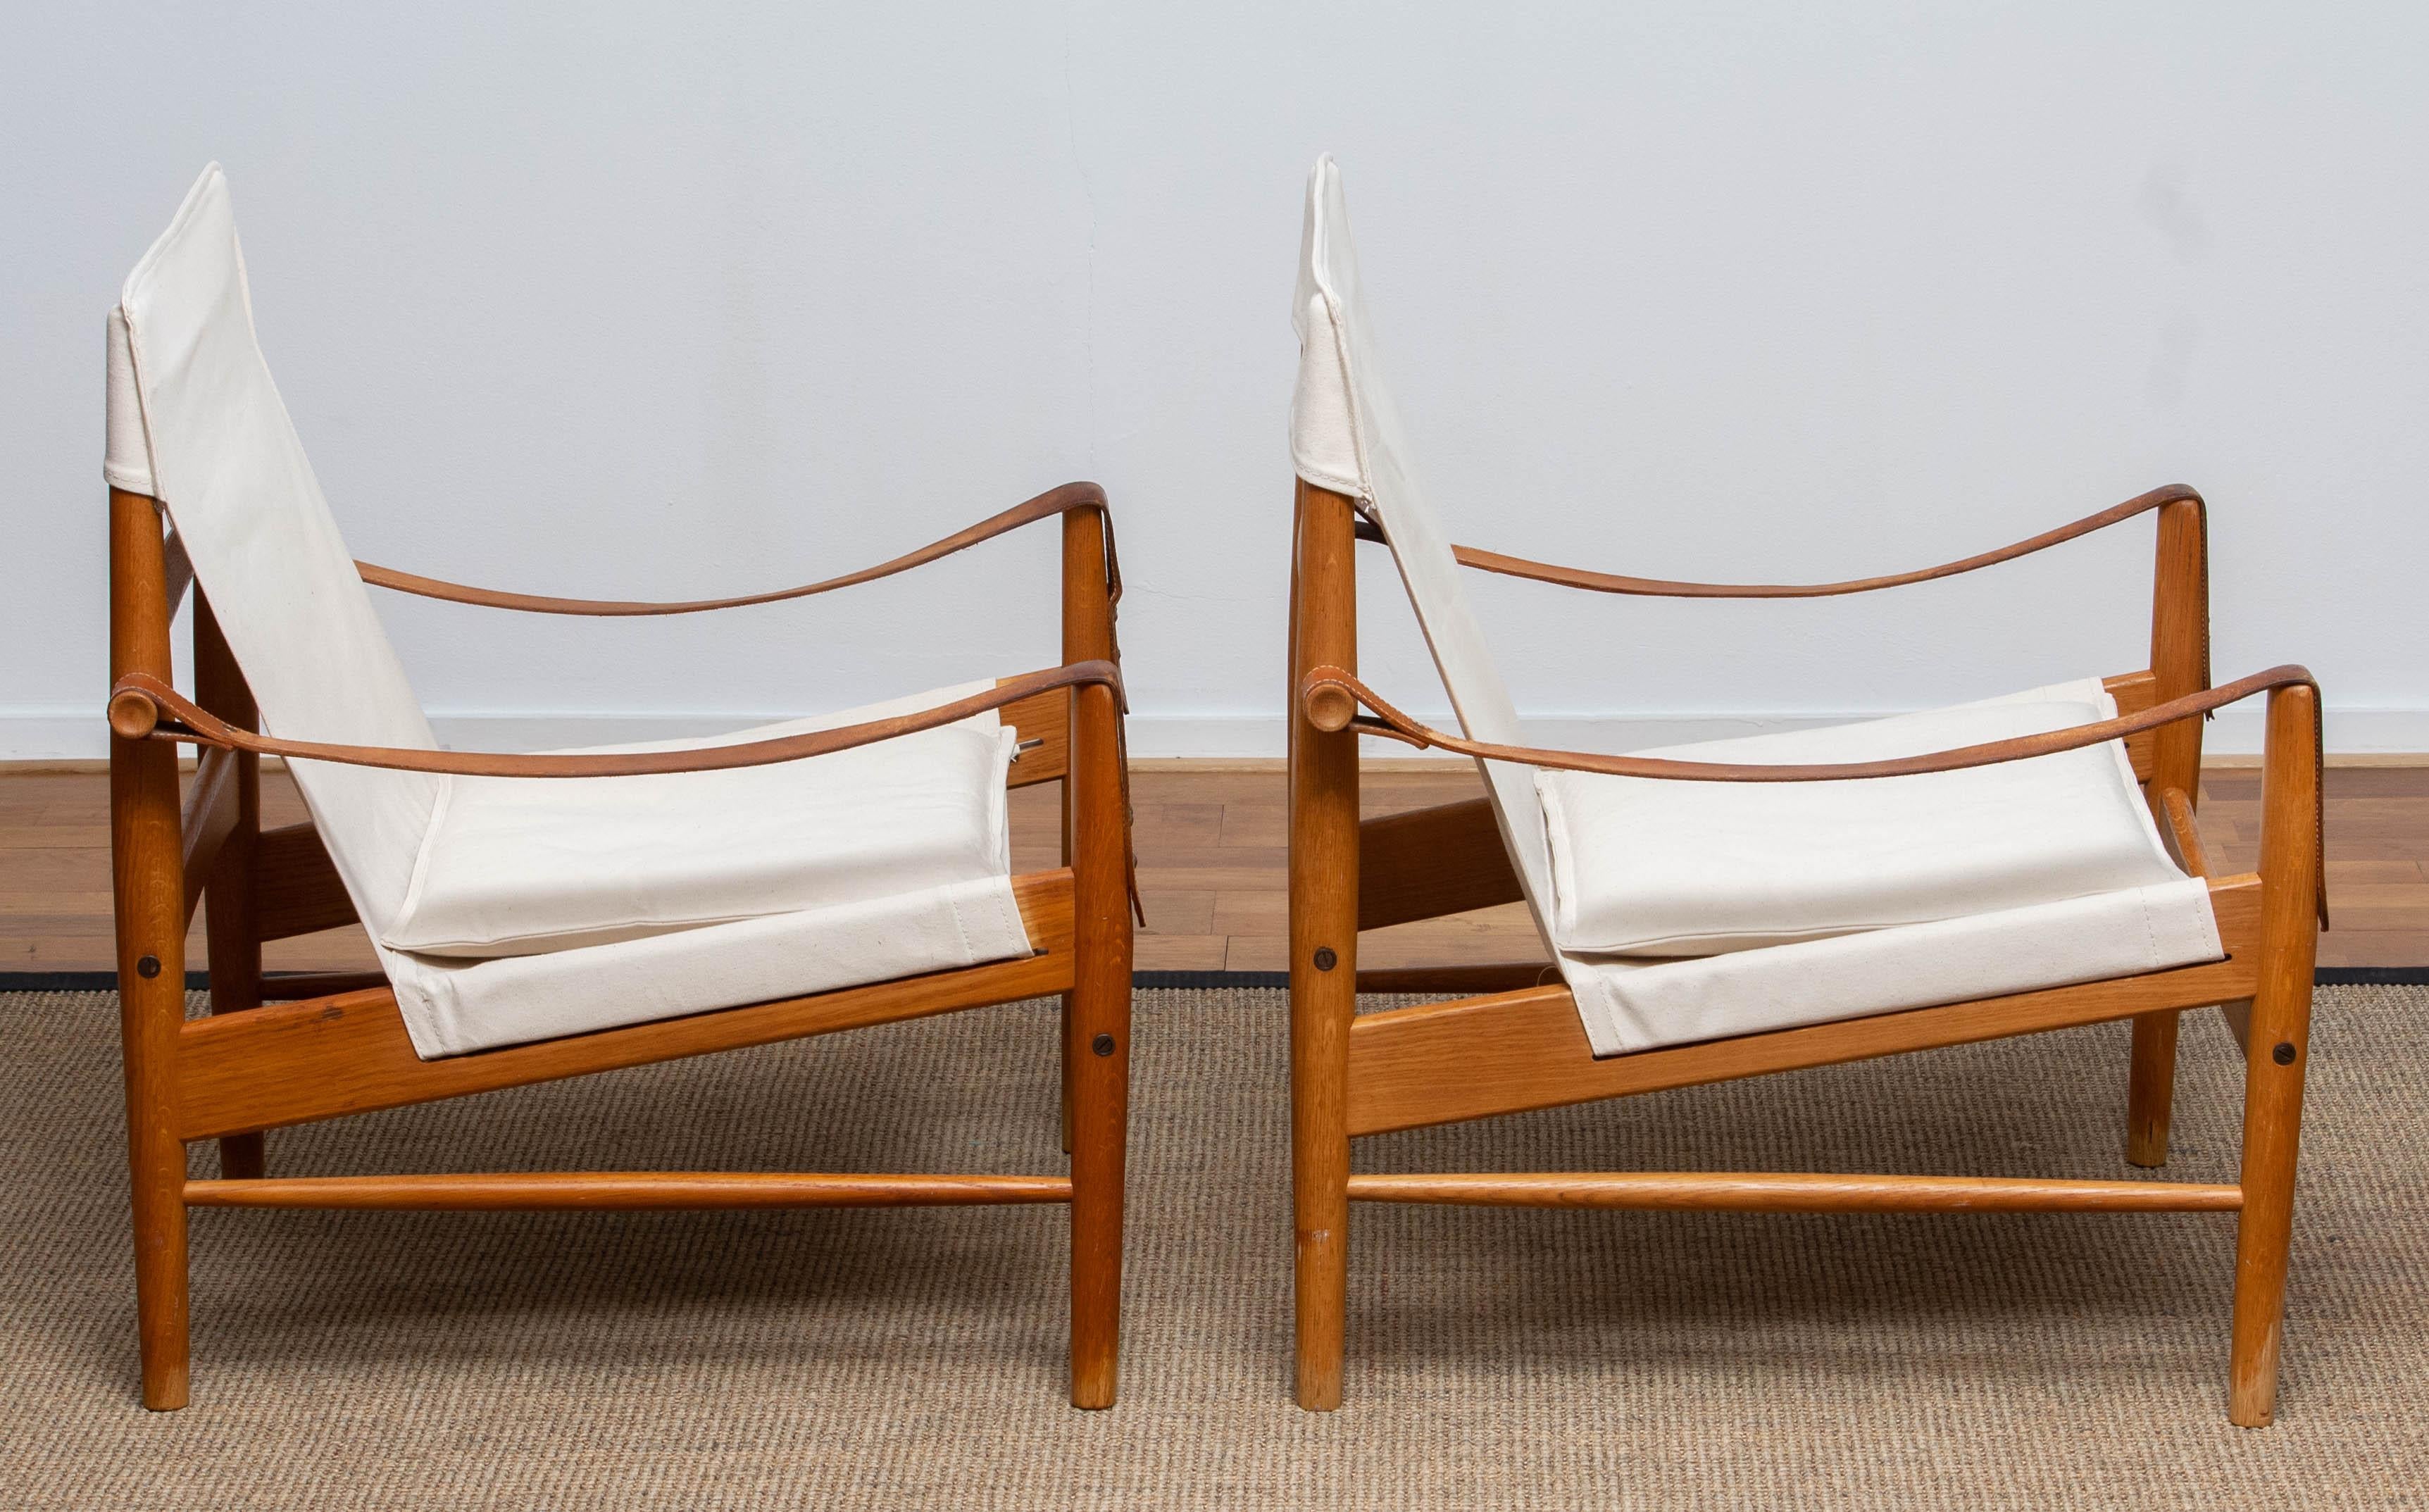 Beautiful pair of safari chairs designed by Hans Olsen for Viska Möbler in Kinna, Sweden.
These chairs are made of oak with a new canvas upholstery.
They are in a Wonderful condition and marked.
Period 1960s.
Dimensions: H.81 cm, W.73 cm, D.70